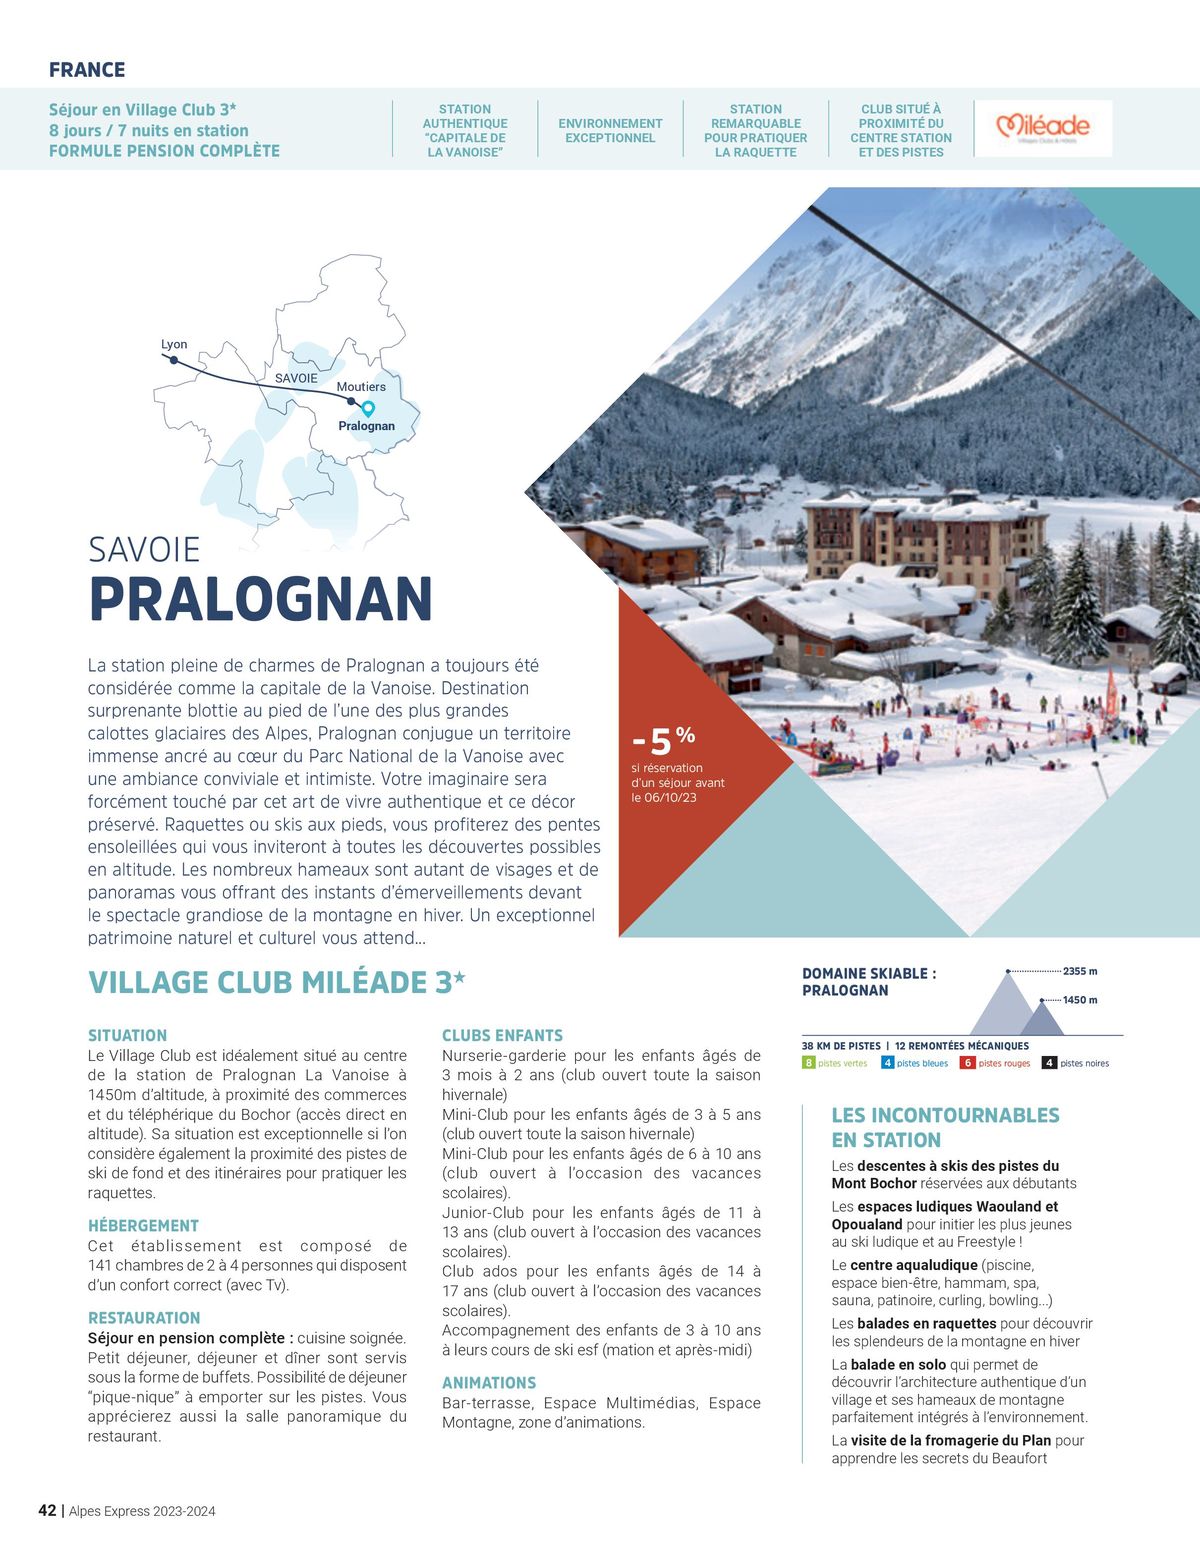 Catalogue Alpes Express - Hiver 2023 - 2024, page 00042